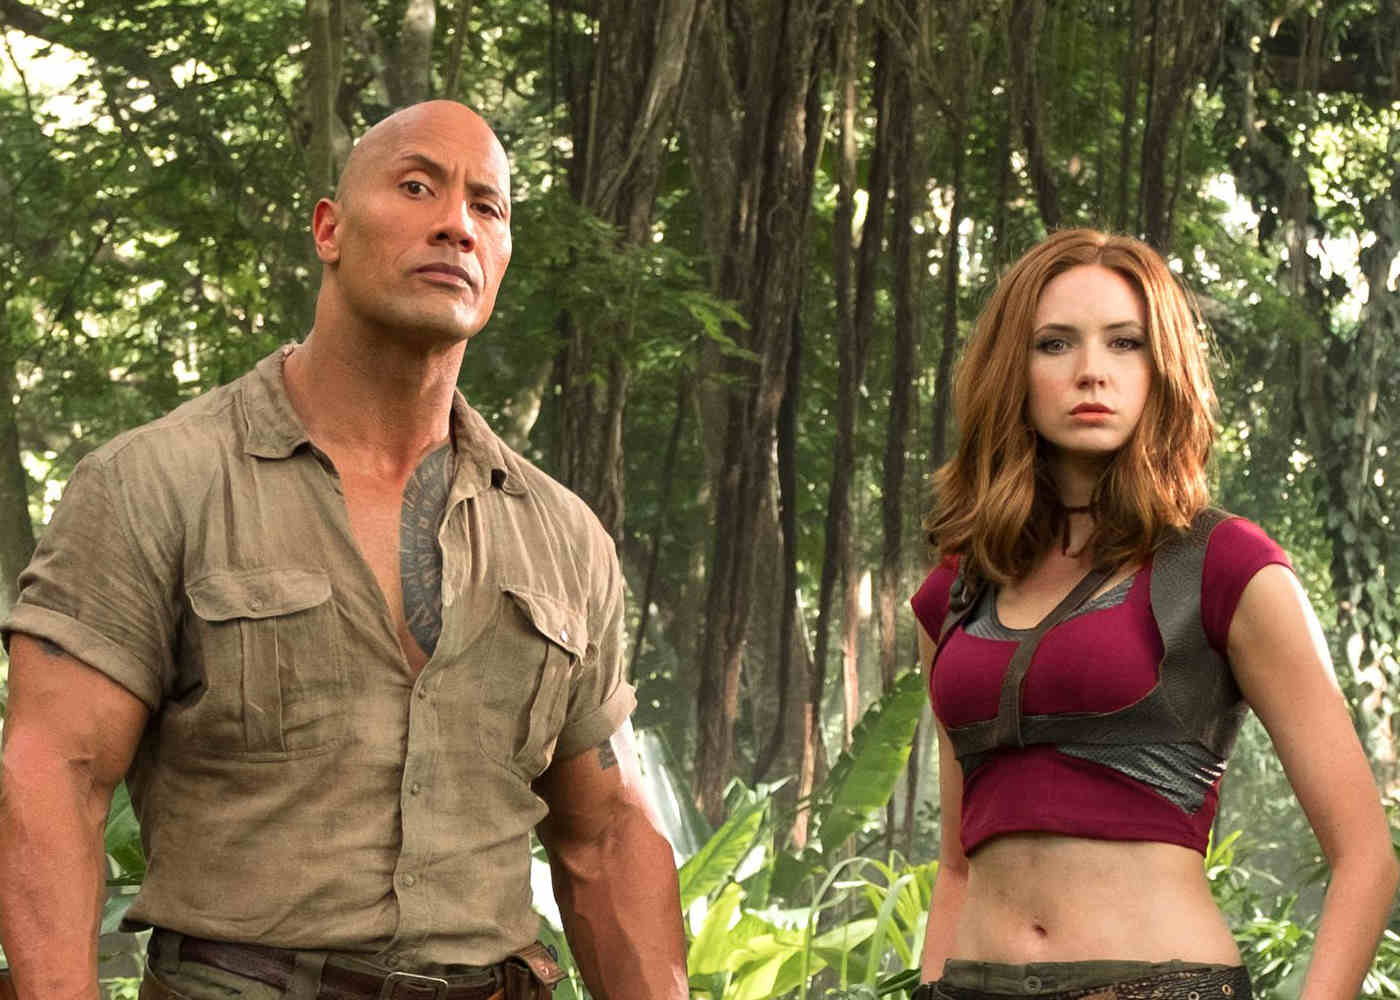 A New Jumanji: Welcome to the Jungle Trailer Swings Into View